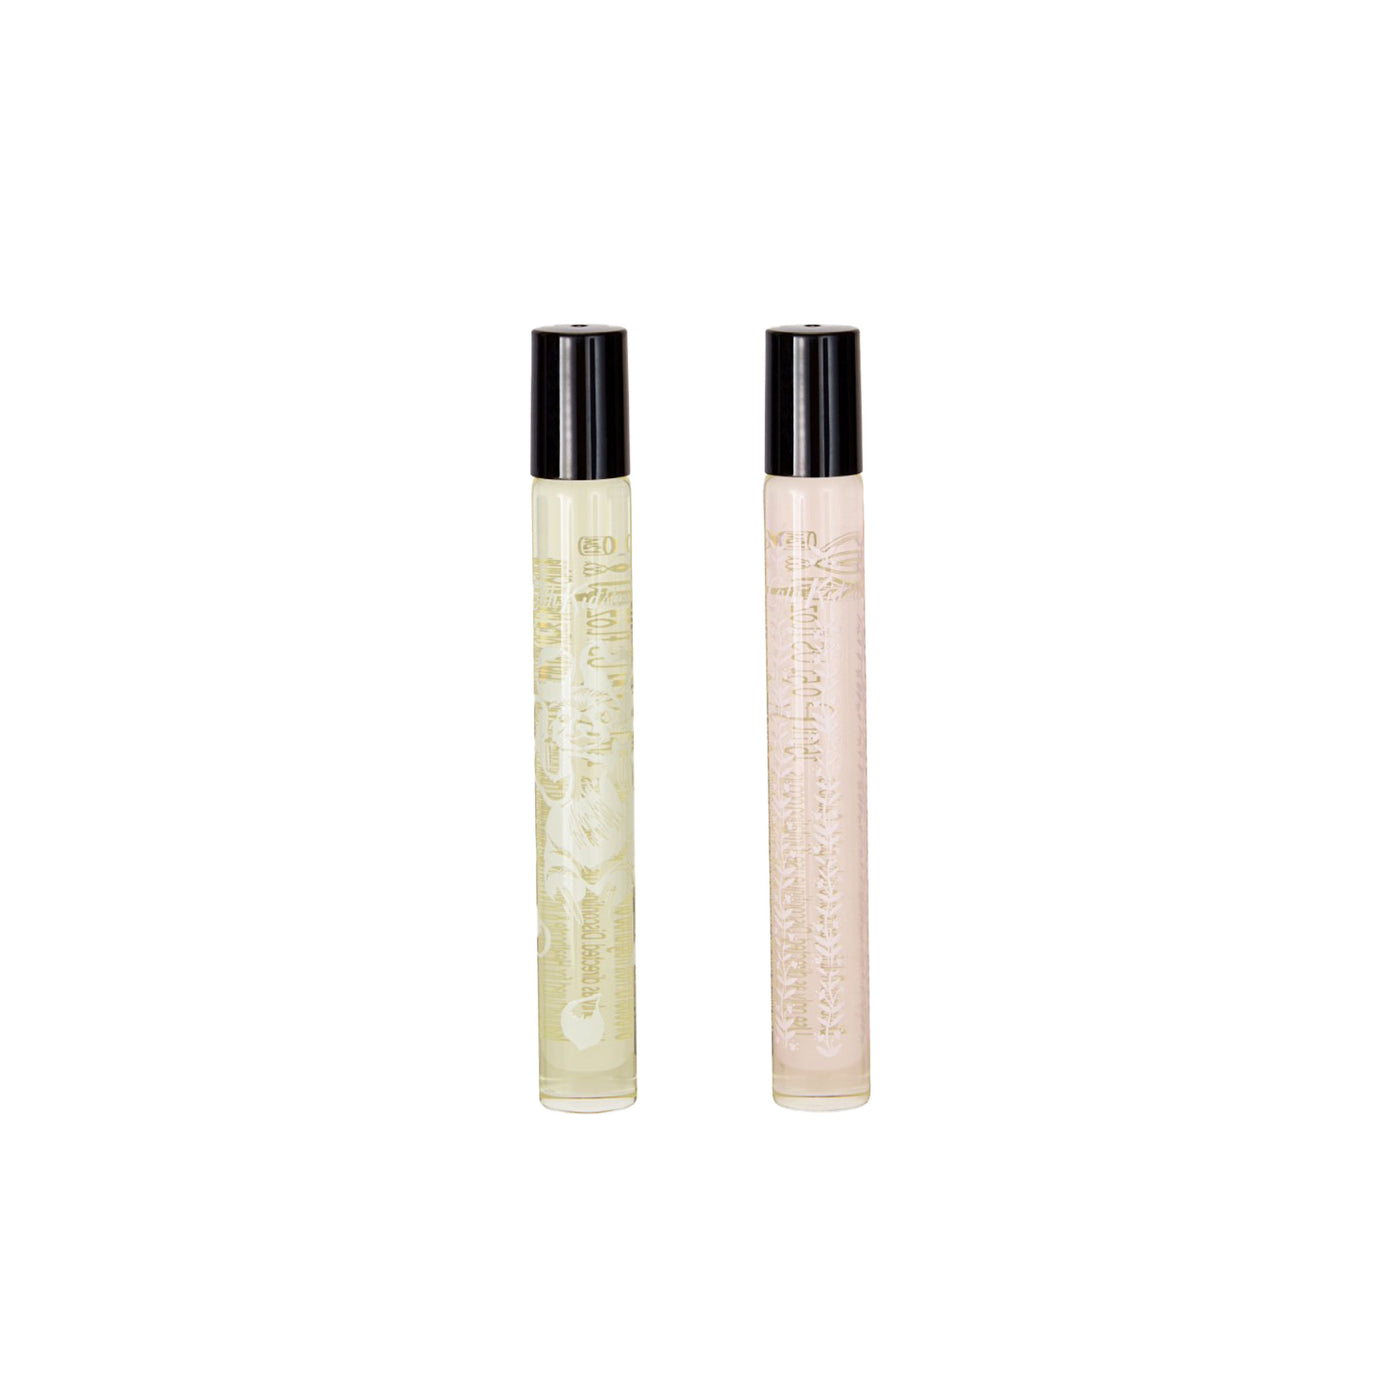 The Story Tree Wake Up & Wind Down EDT Rollerball Duo